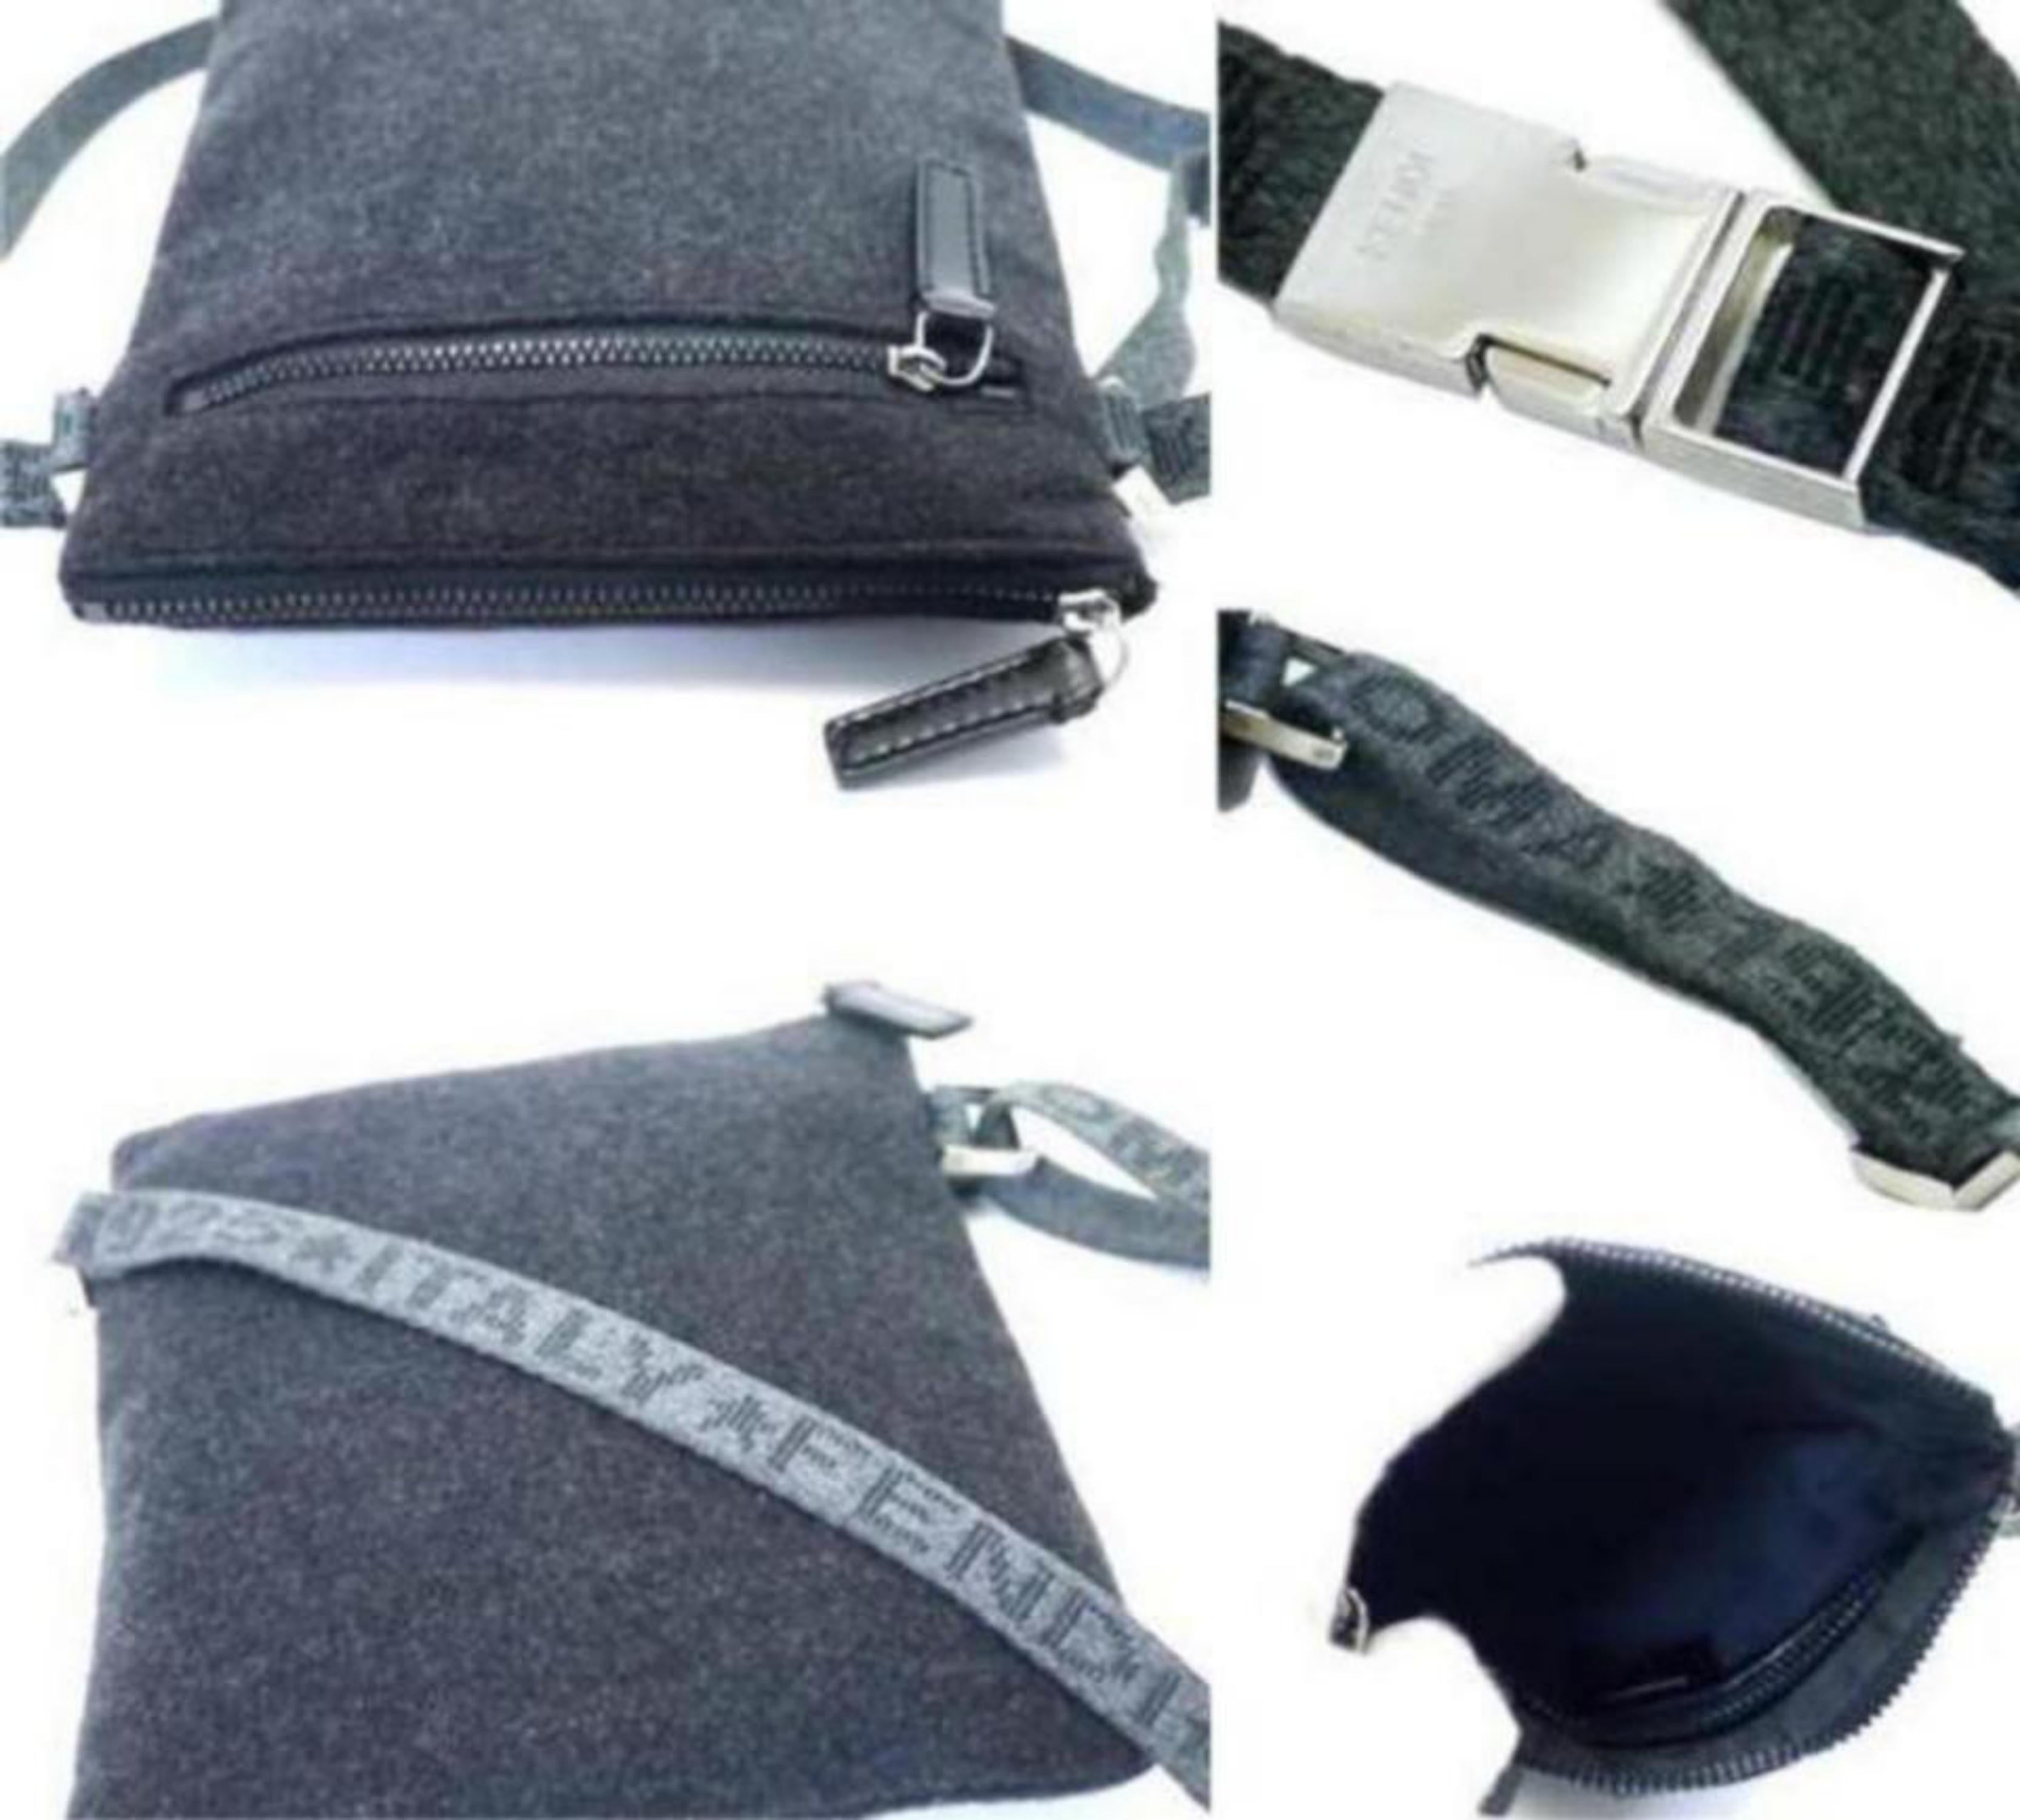 Fendi Logo Strap Bum Waist Pouch 228583 Charcoal Wool Blend Shoulder Bag In Excellent Condition For Sale In Forest Hills, NY